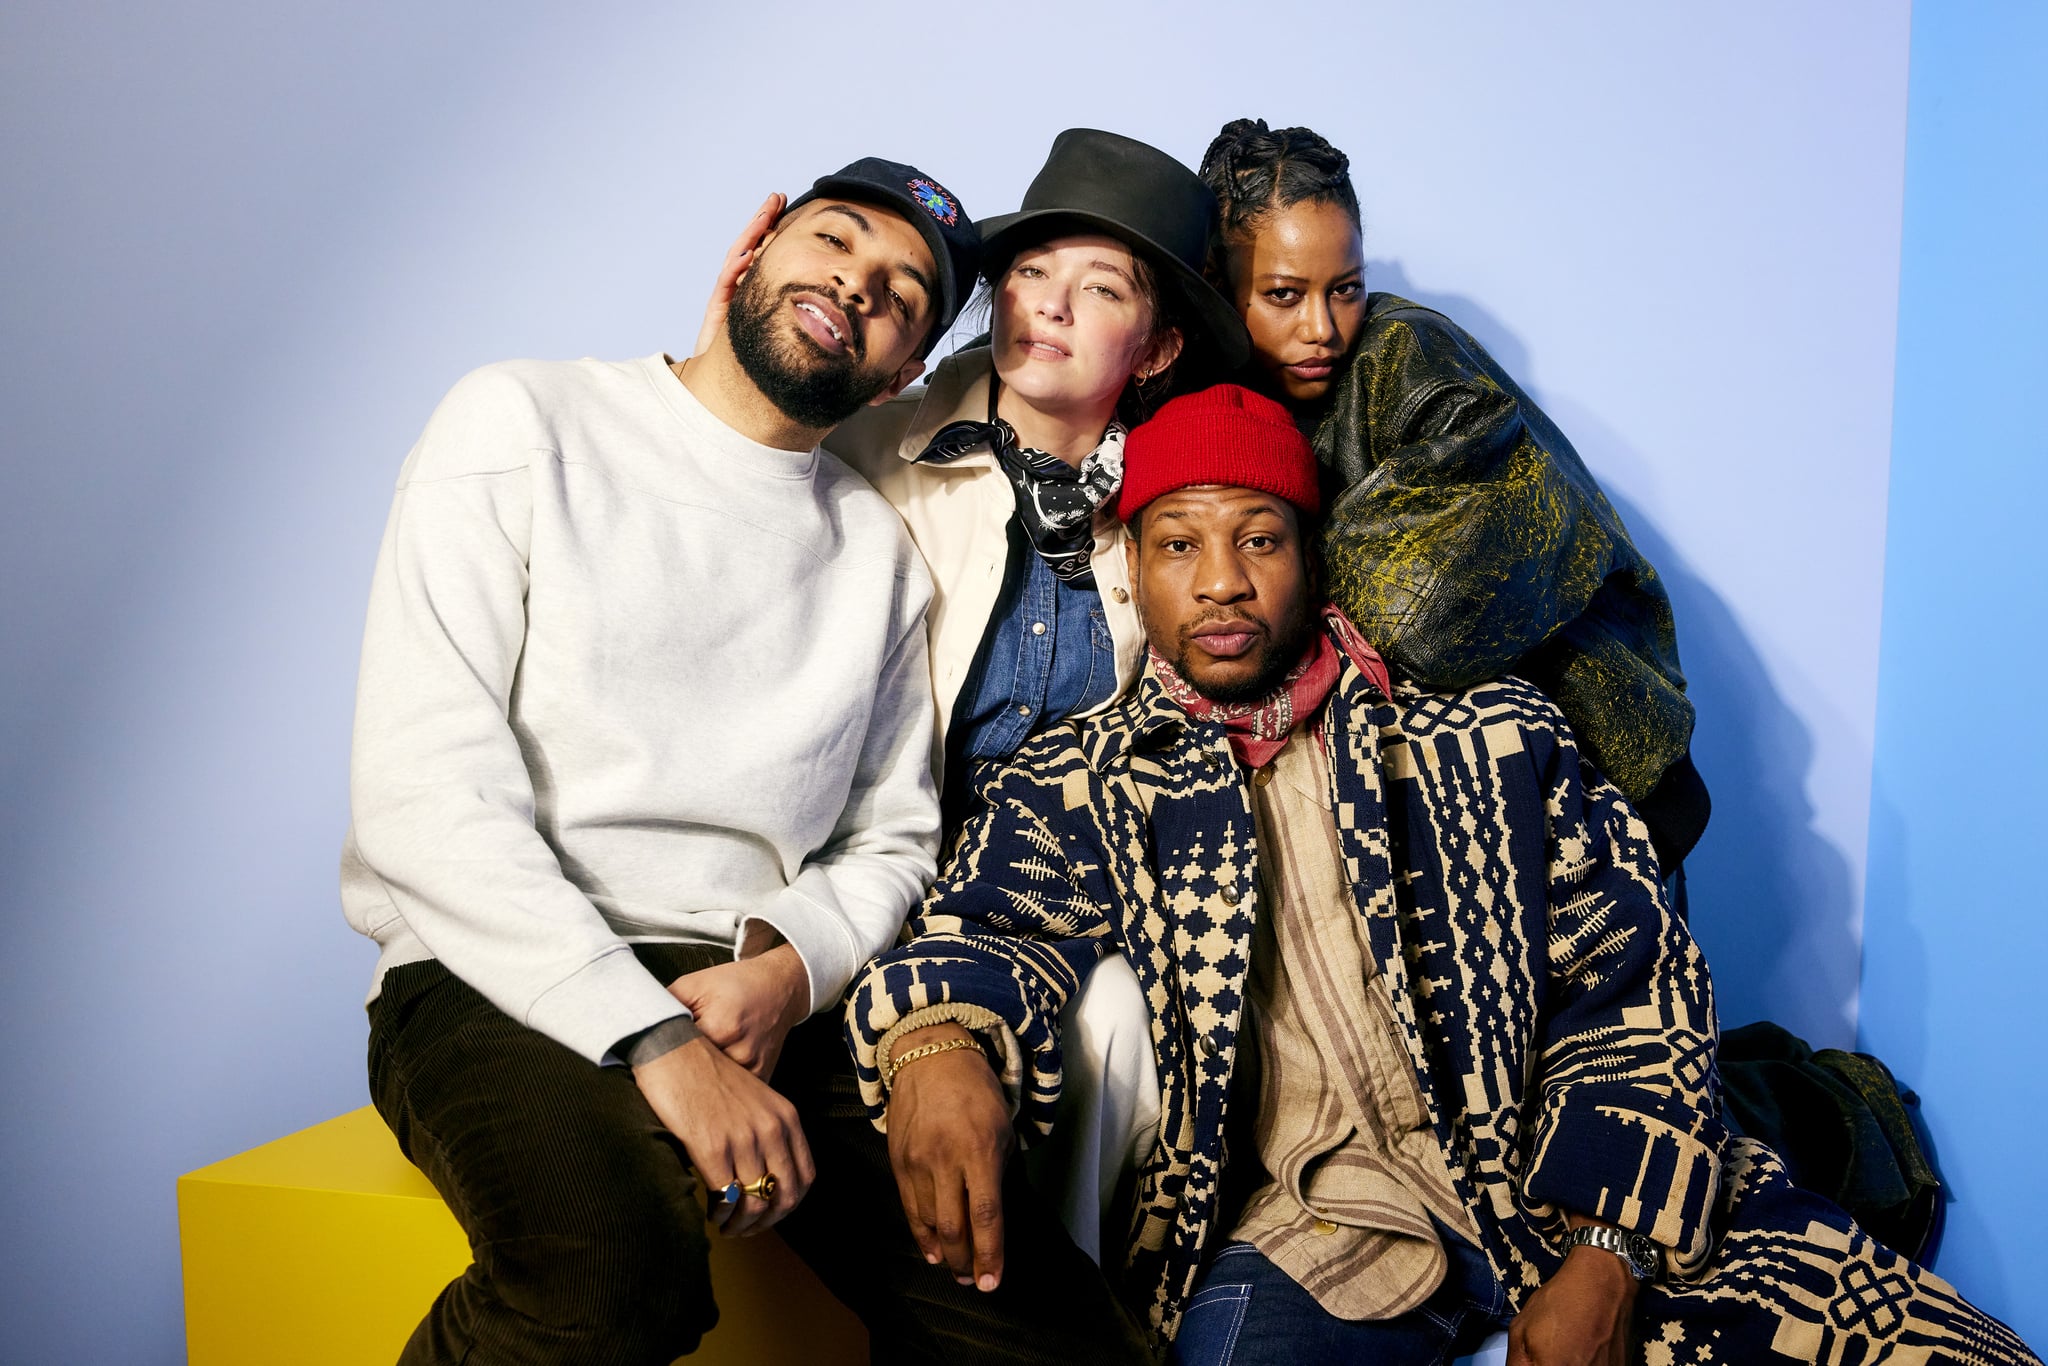 PARK CITY, UTAH - JANUARY 20: (L-R) Elijah Bynum, Haley Bennett, Jonathan Majors, and Taylour Paige visit The IMDb Portrait Studio at Acura Festival Village on Location at Sundance 2023 on January 20, 2023 in Park City, Utah. (Photo by Corey Nickols/Getty Images for IMDb)